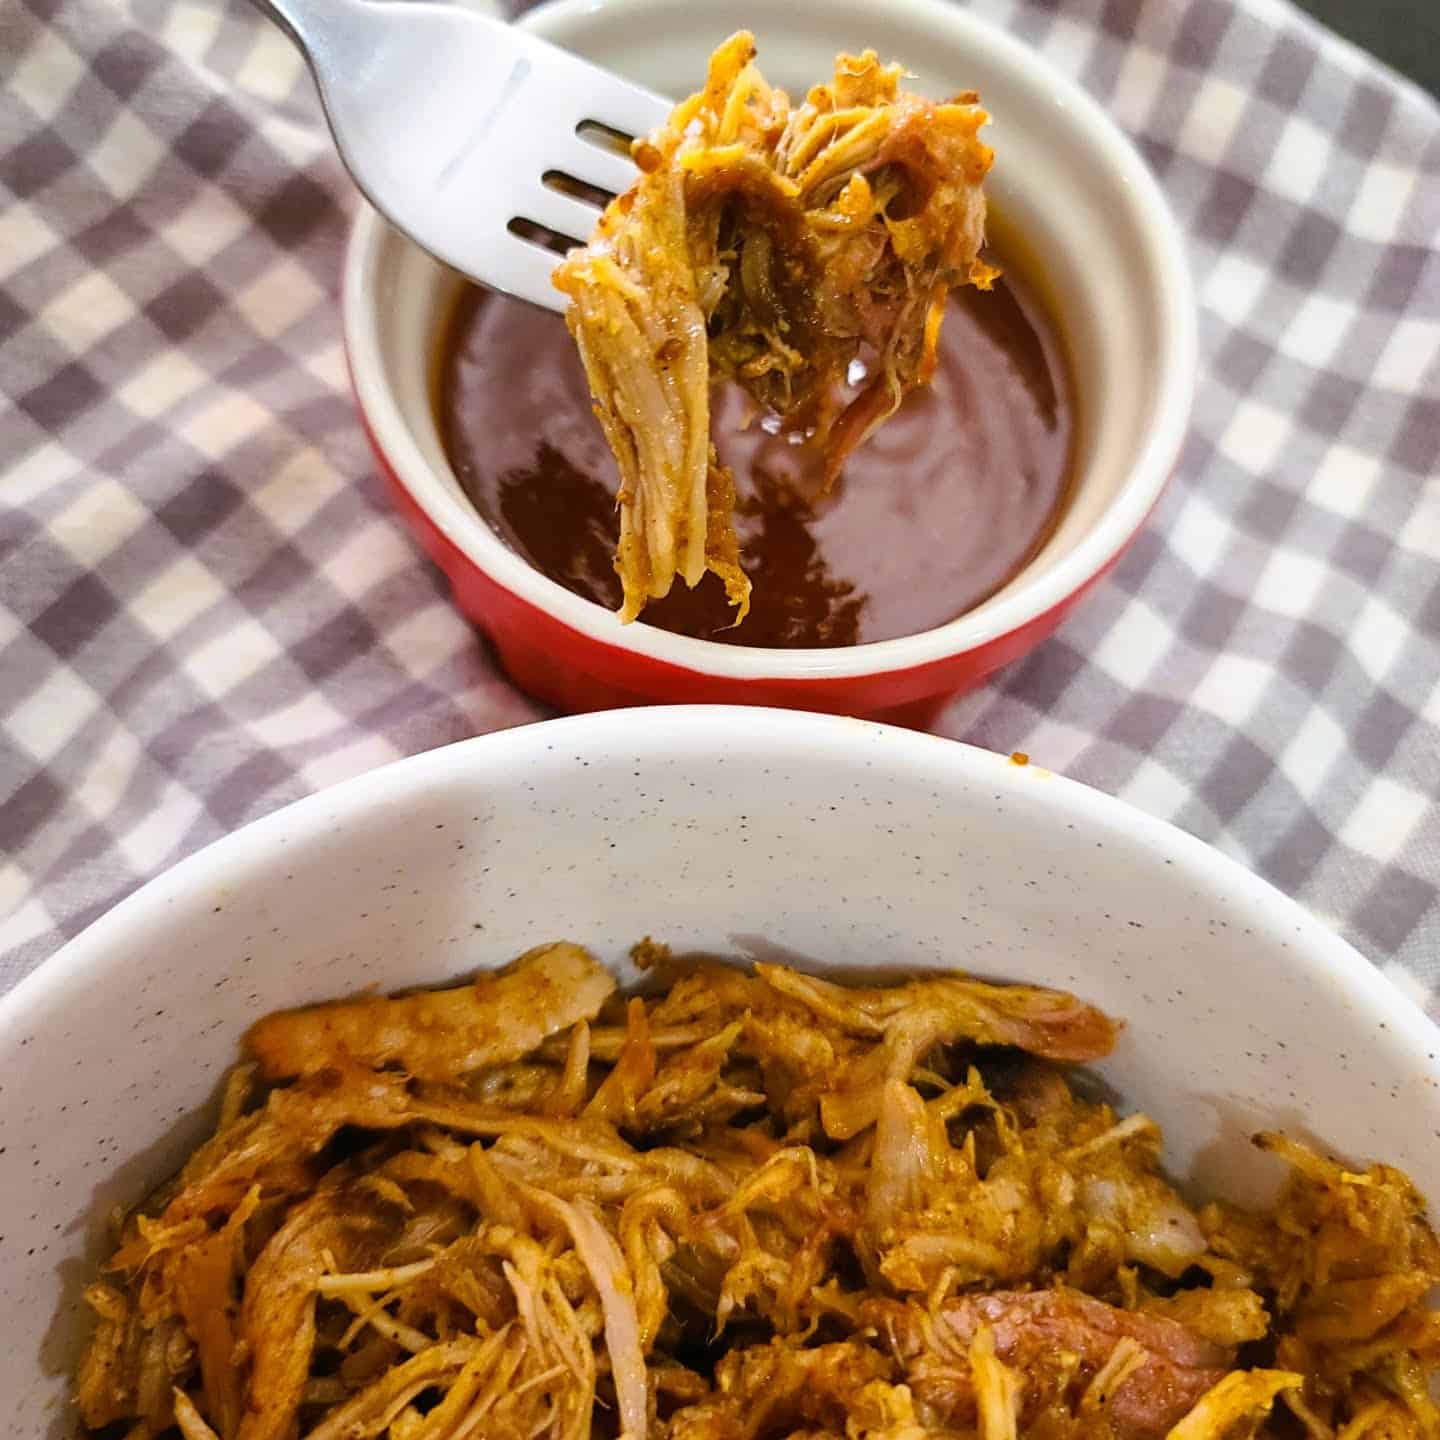 Pulled pork with bbq sauce